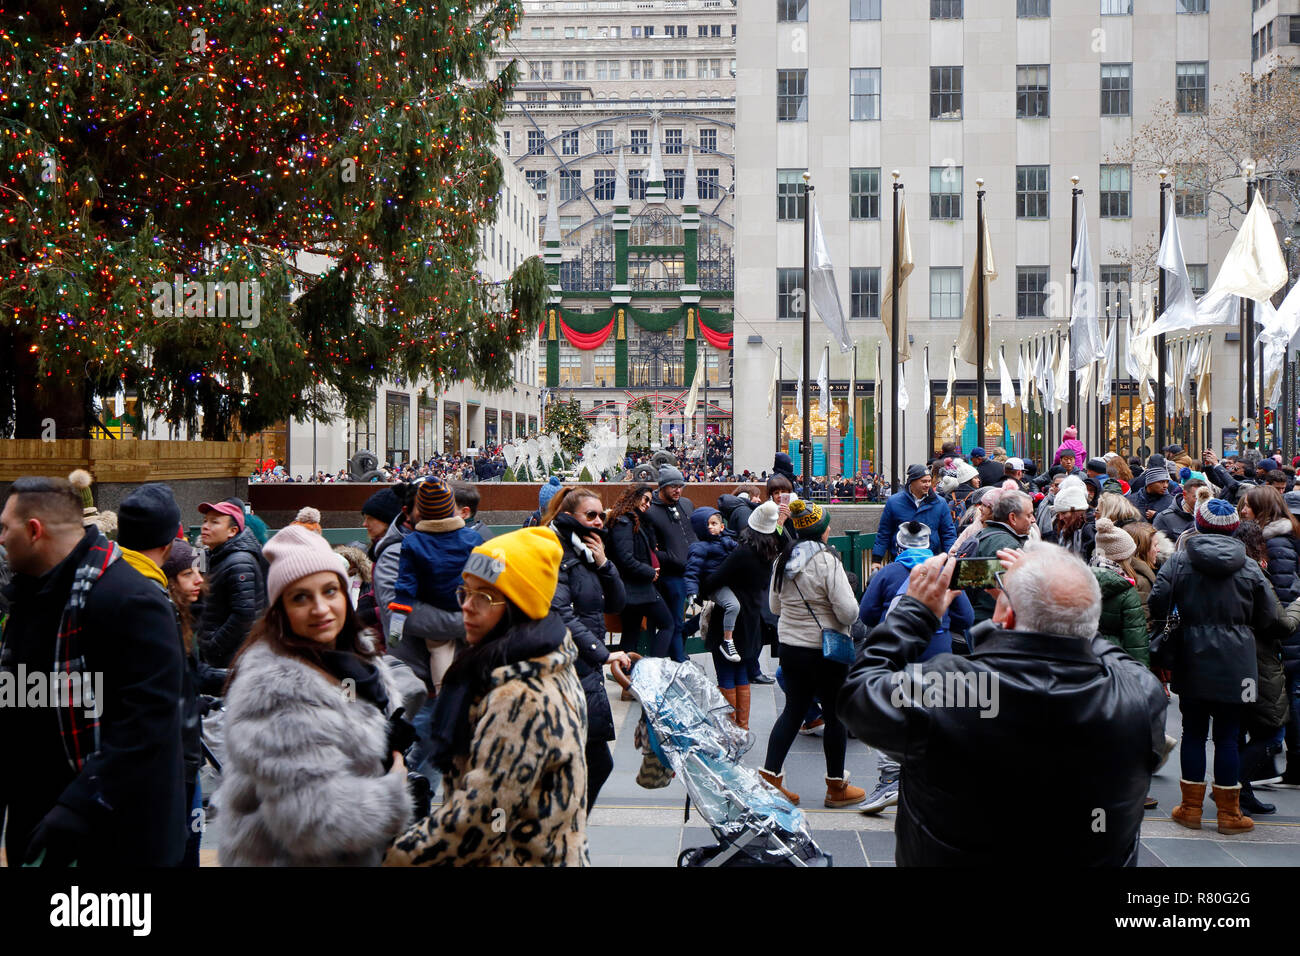 Selfie takers, and tourists at the Rockefeller Center Christmas Tree,  New York, NY (December 8, 2018) Stock Photo